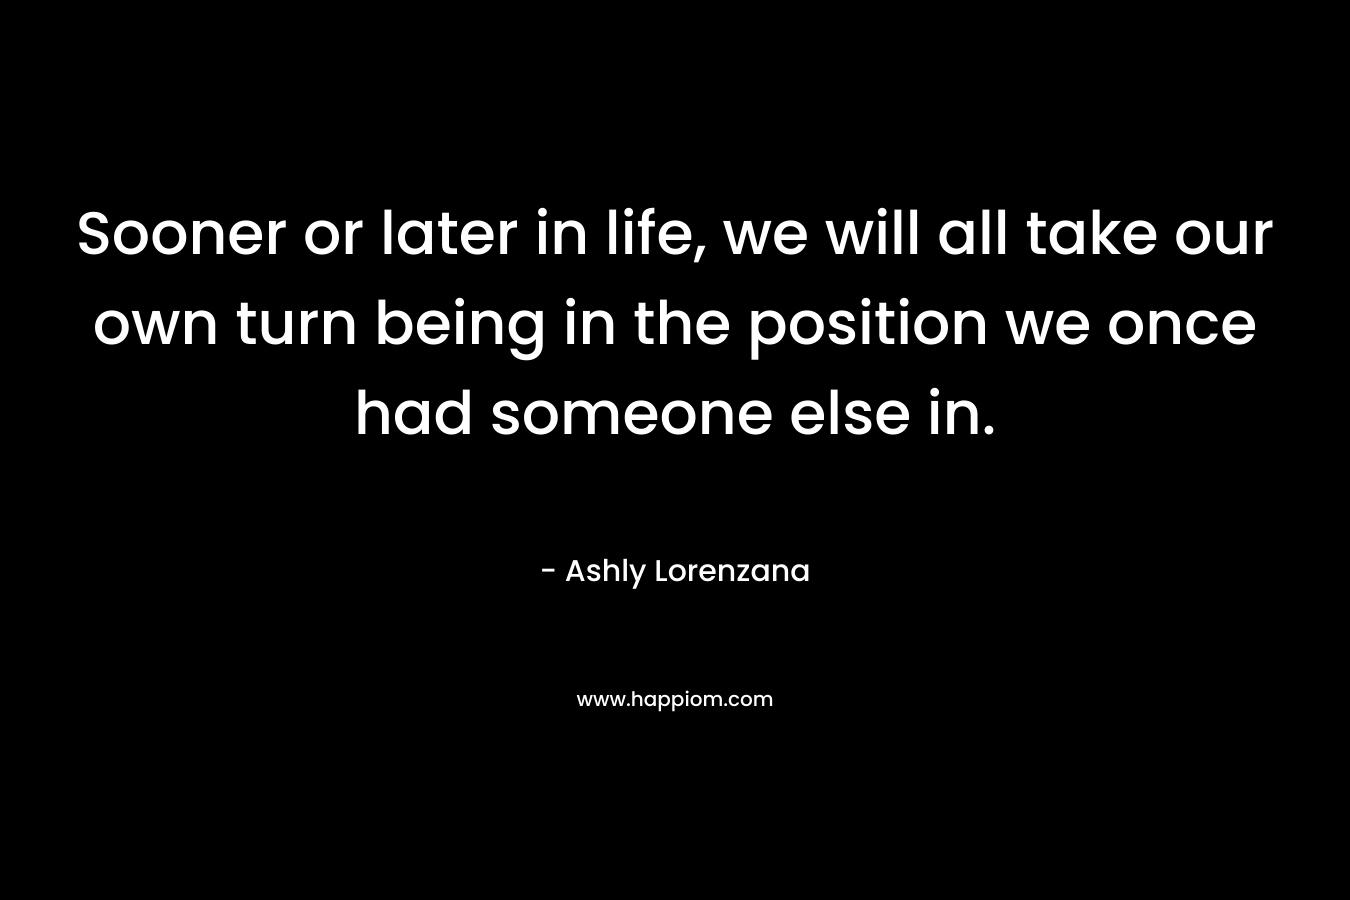 Sooner or later in life, we will all take our own turn being in the position we once had someone else in.